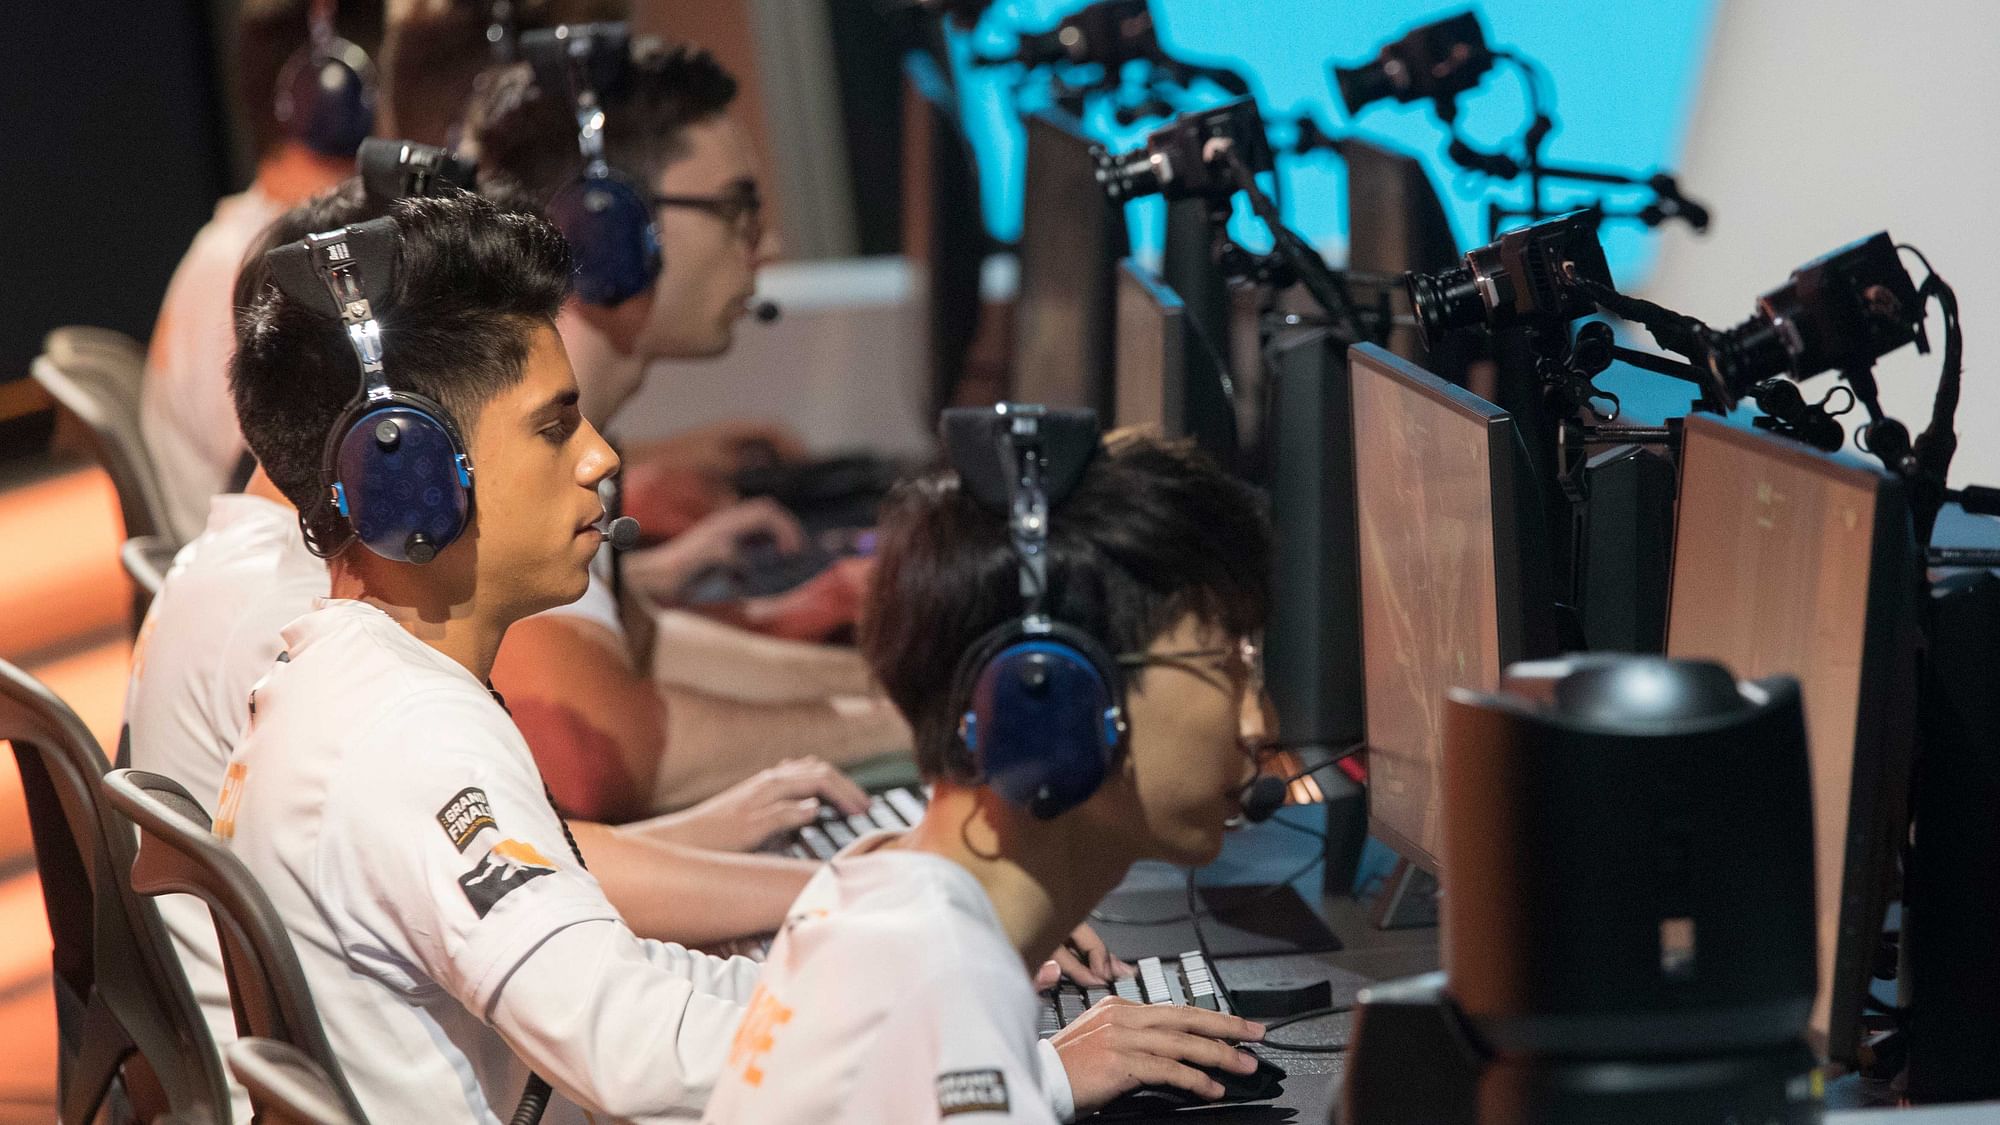 Philadelphia Fusion players compete against the London Spitfire during the Overwatch League Grand Finals competition, Saturday, July 28, 2018, at Barclays Center in the Brooklyn borough of New York.&nbsp;